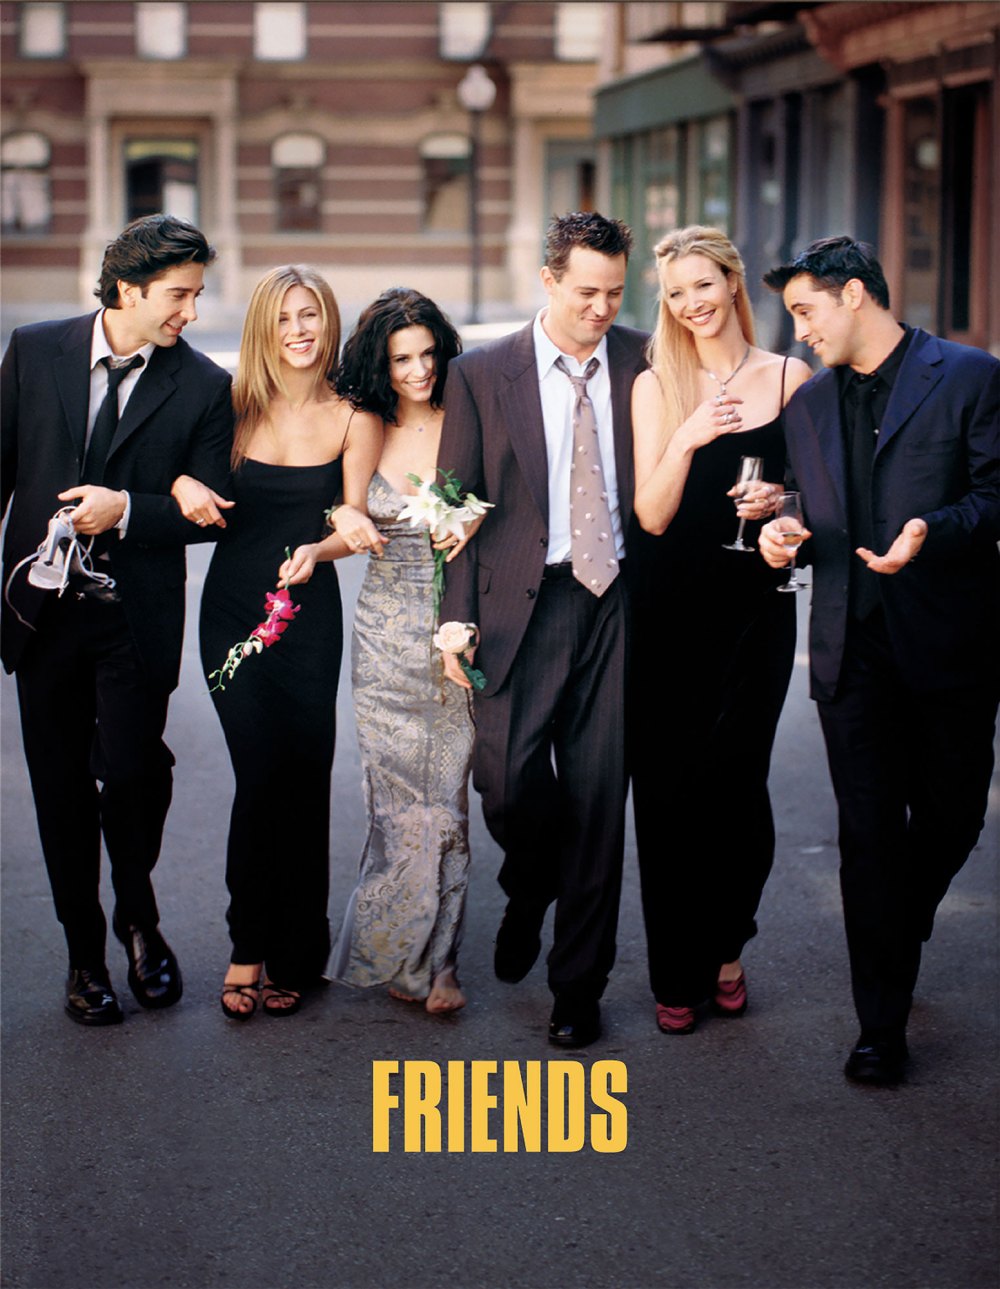 Jennifer Aniston Lisa Kudrow and Courteney Cox Are Destroyed by Brother Matthew Perry Death 4